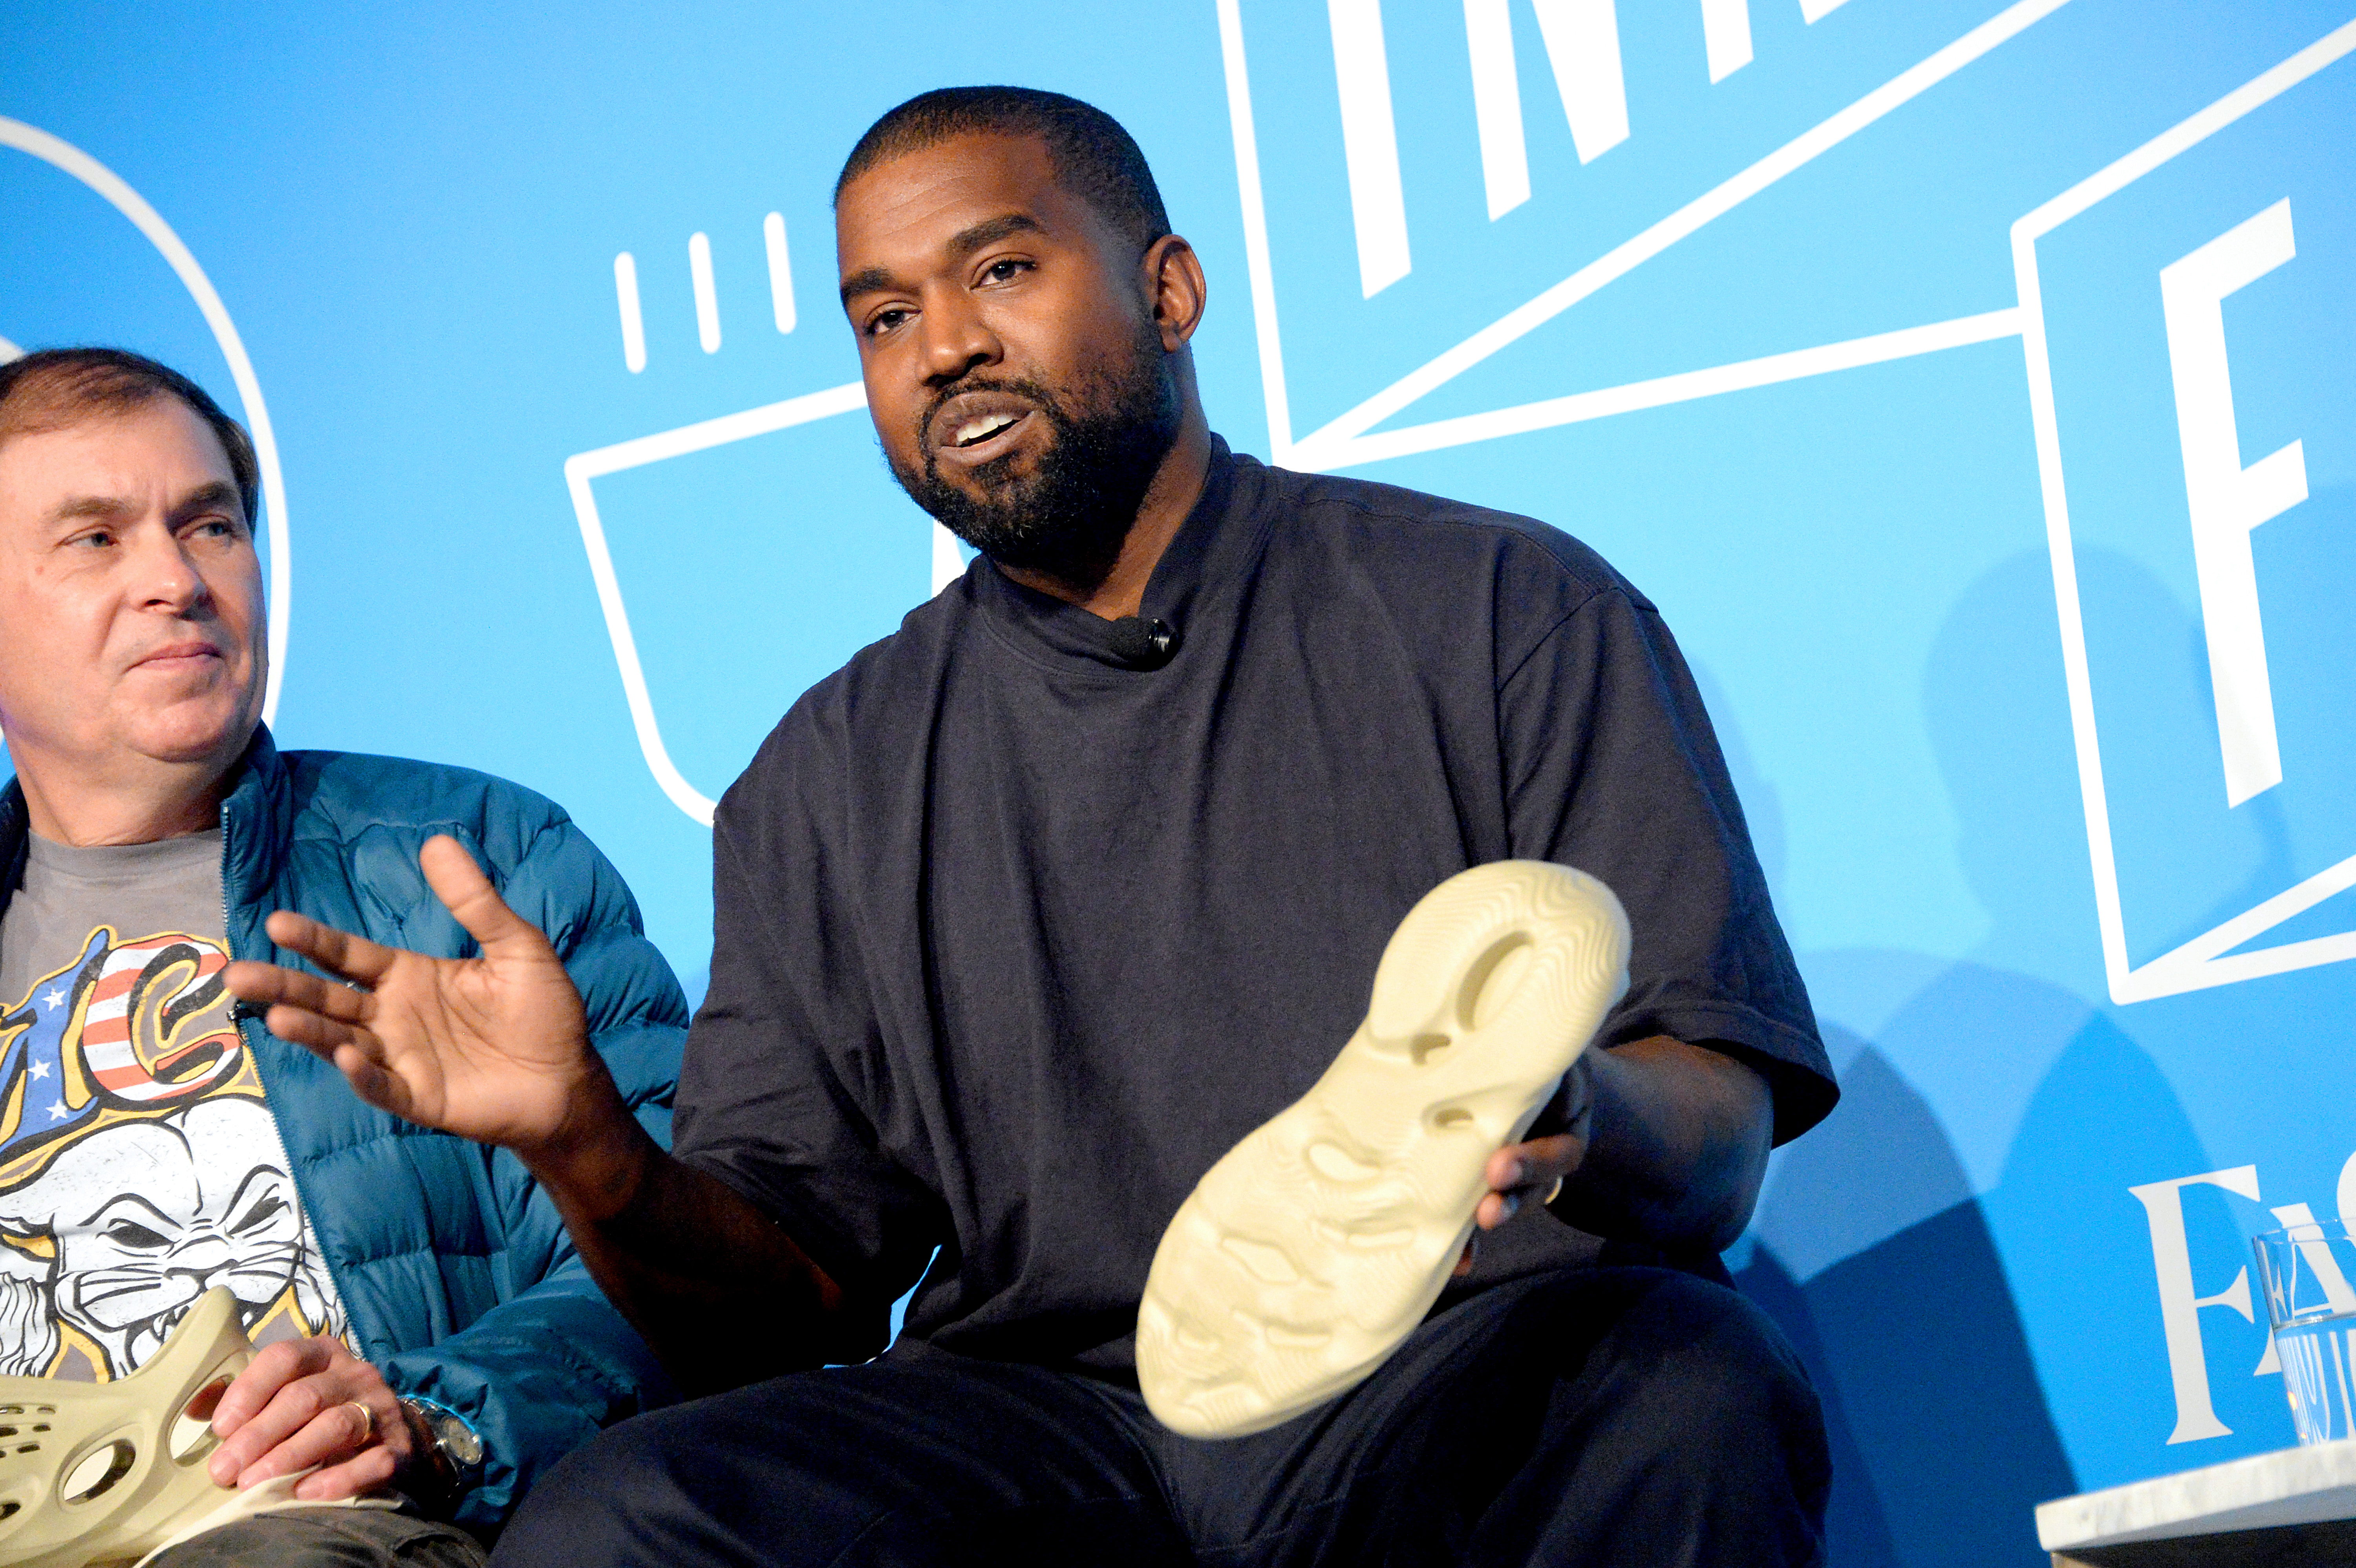 Kanye West’s Yeezy Slides Had Twitter In A State Of Frustration